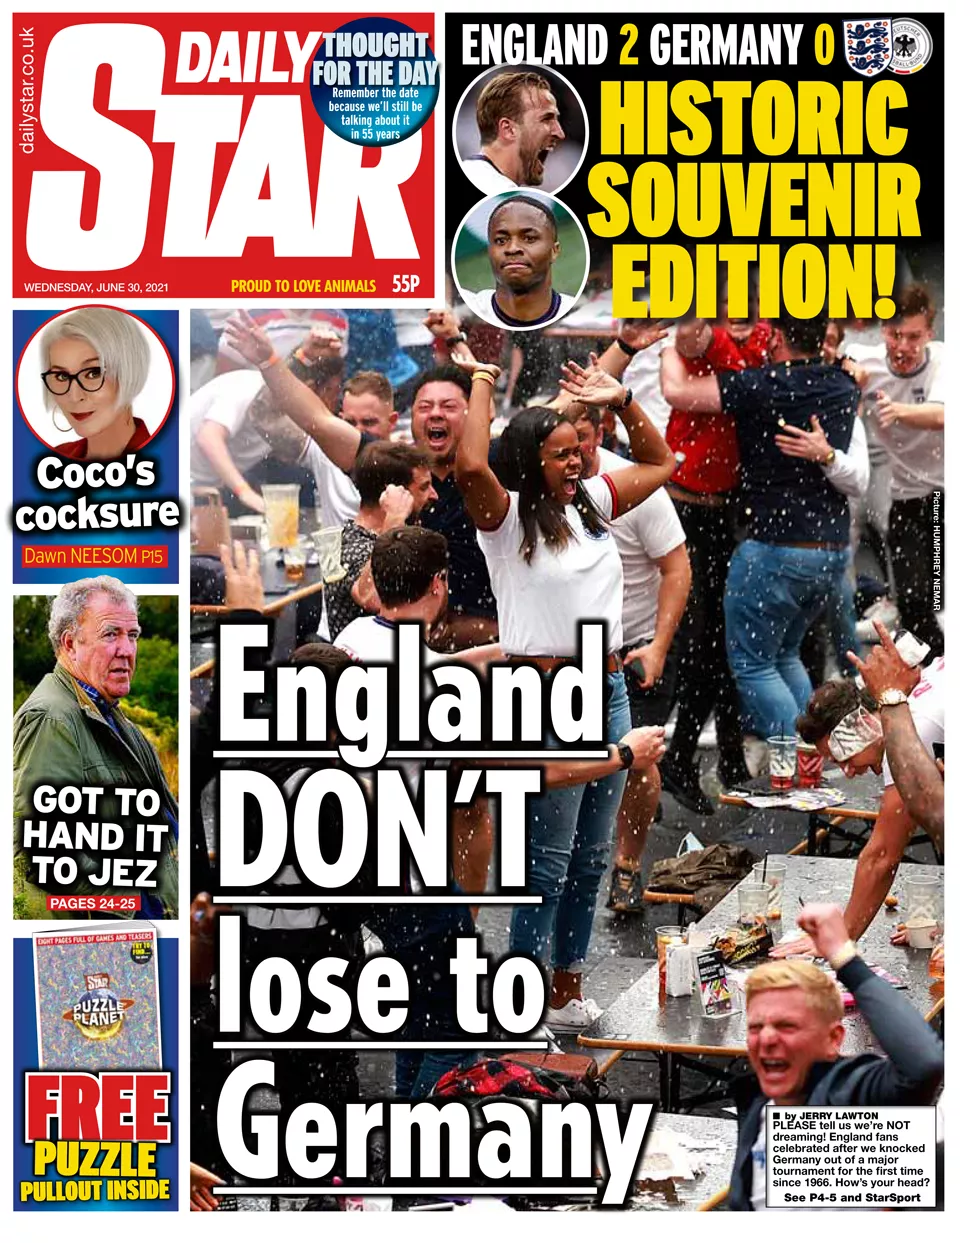 English Papers Front Pages